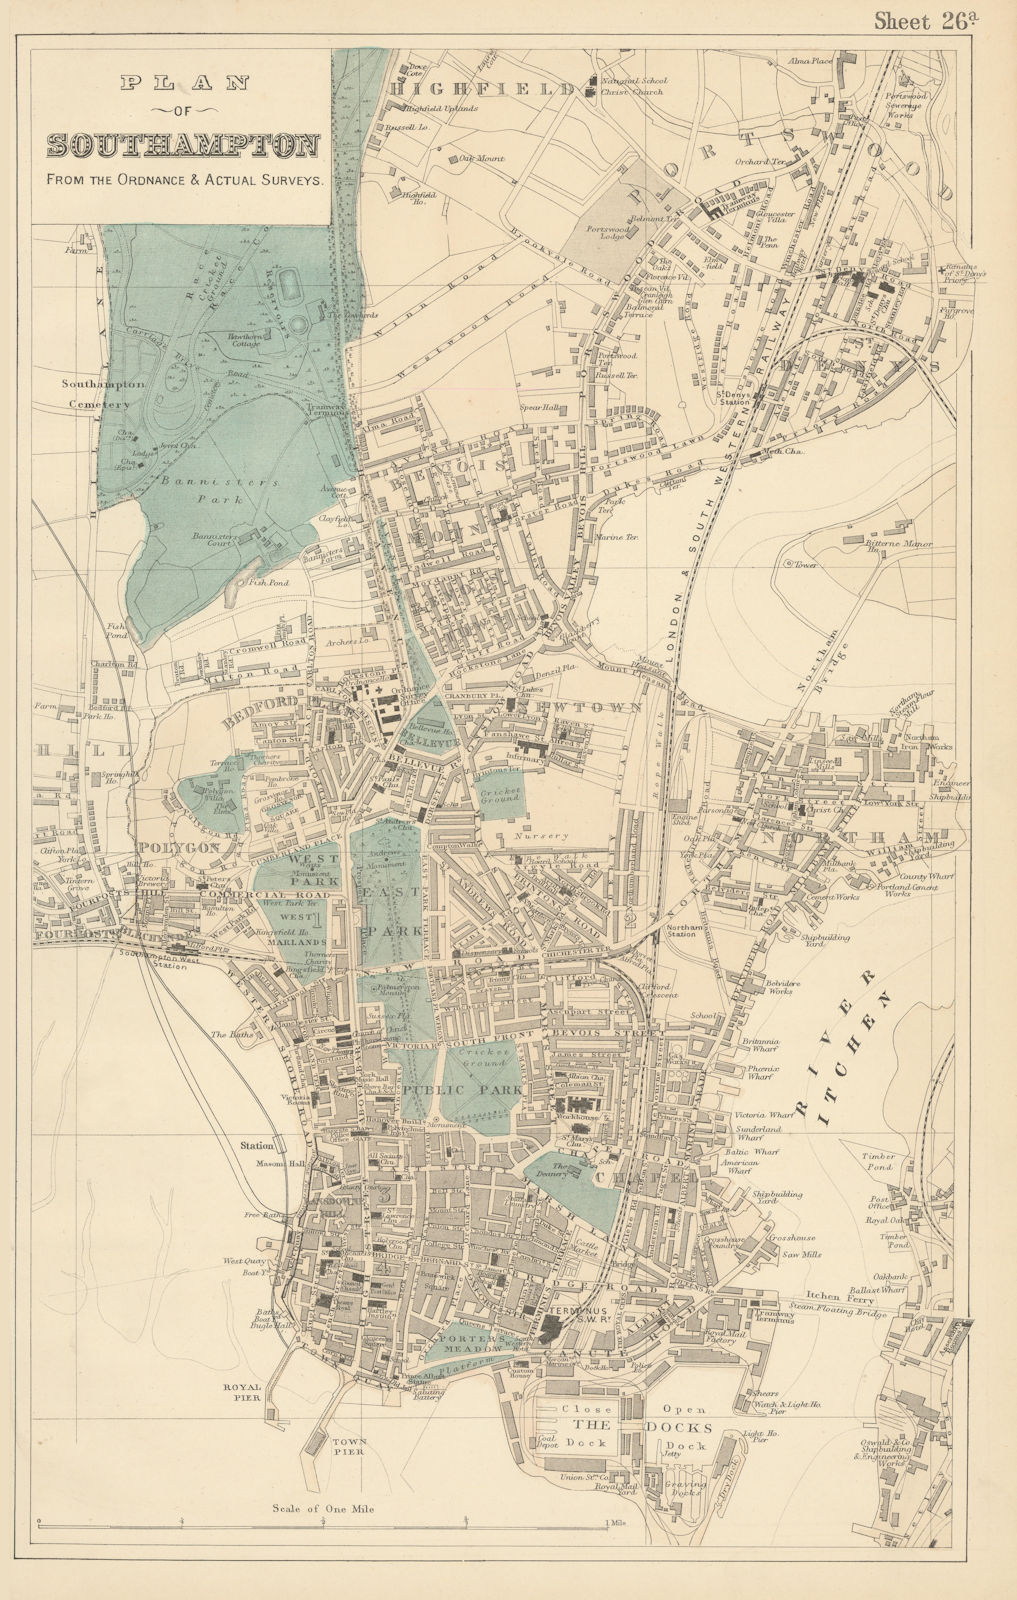 Associate Product SOUTHAMPTON Northam Portswood antique town city plan by GW BACON 1883 old map